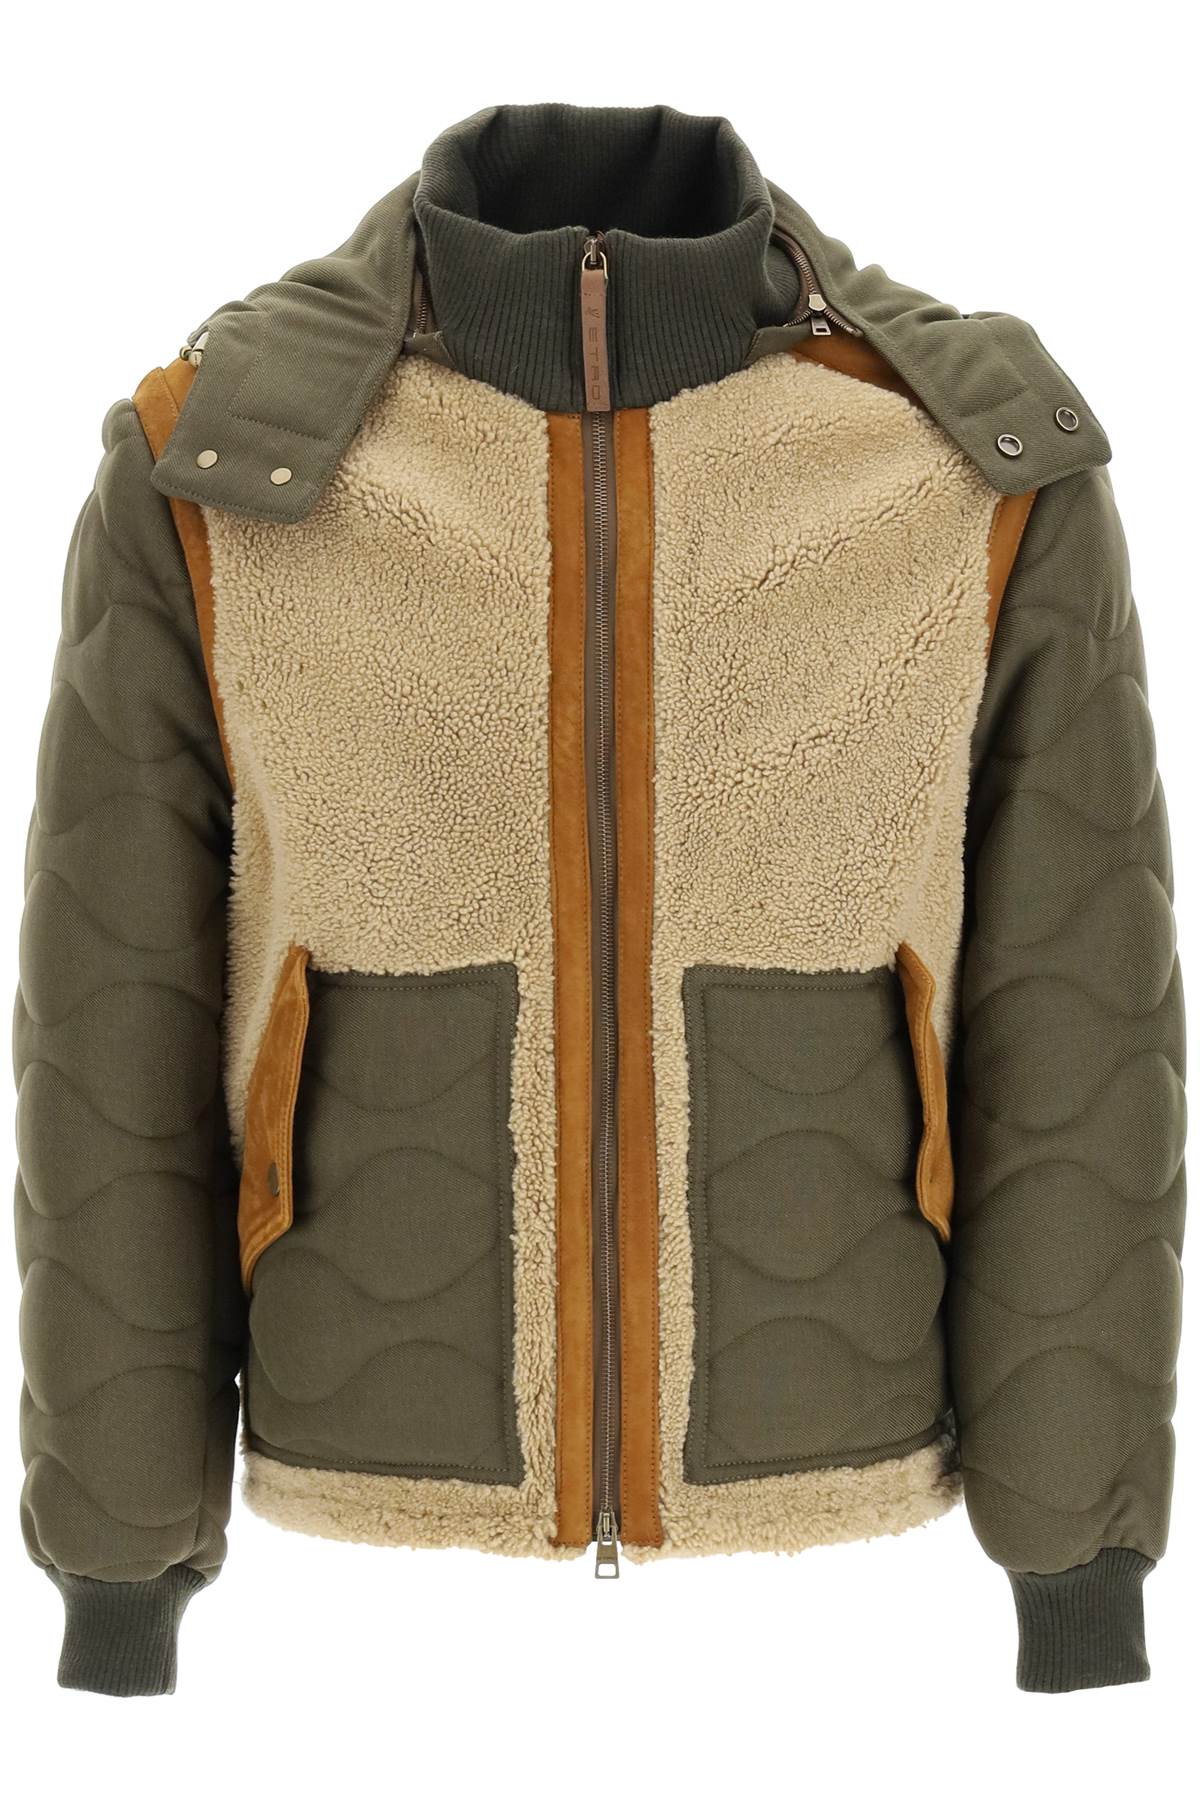 Etro Patchwork Jacket In Cotton And Shearling